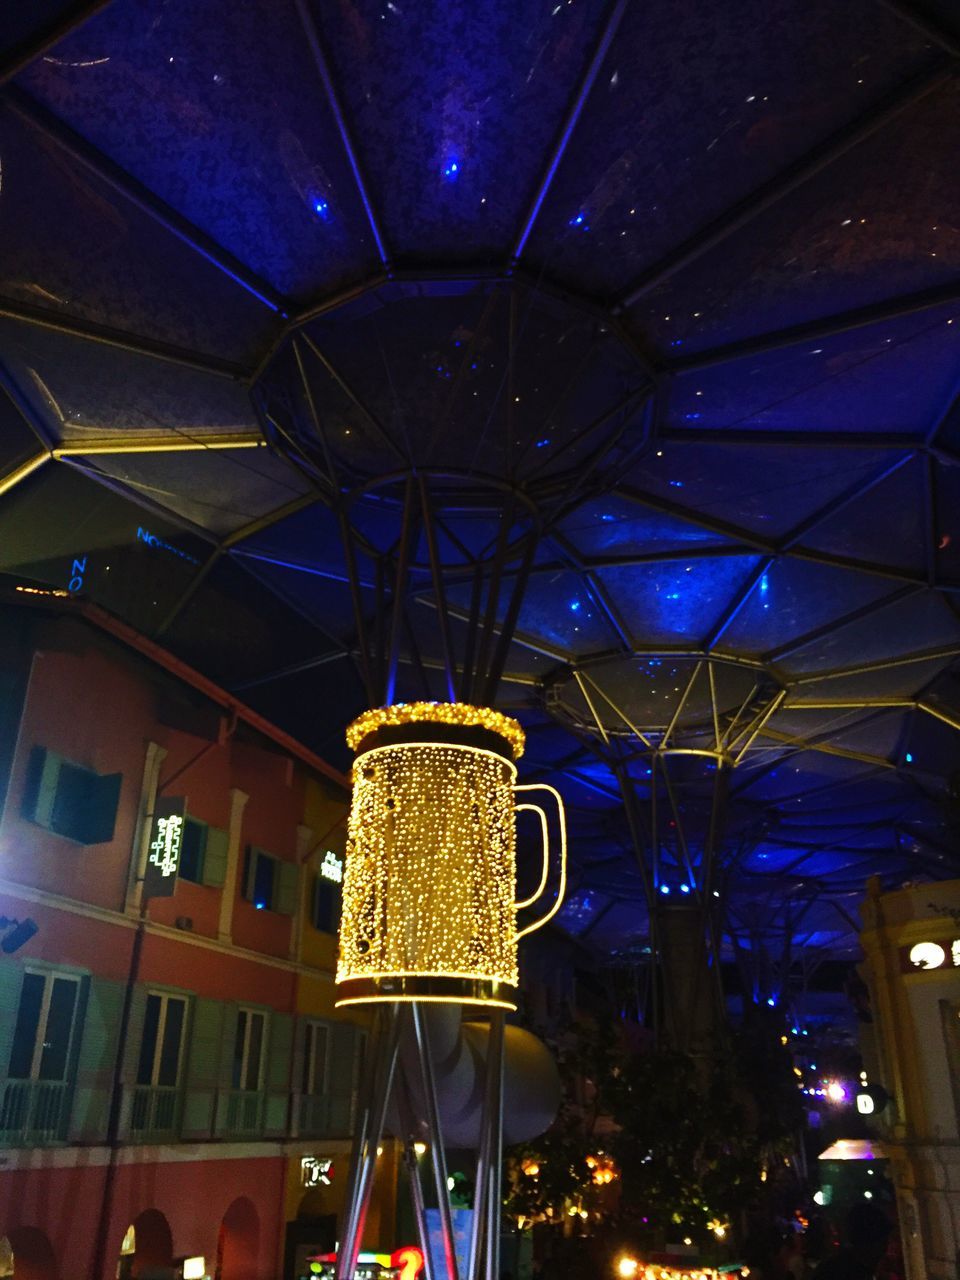 LOW ANGLE VIEW OF ILLUMINATED LIGHTING EQUIPMENT IN CITY